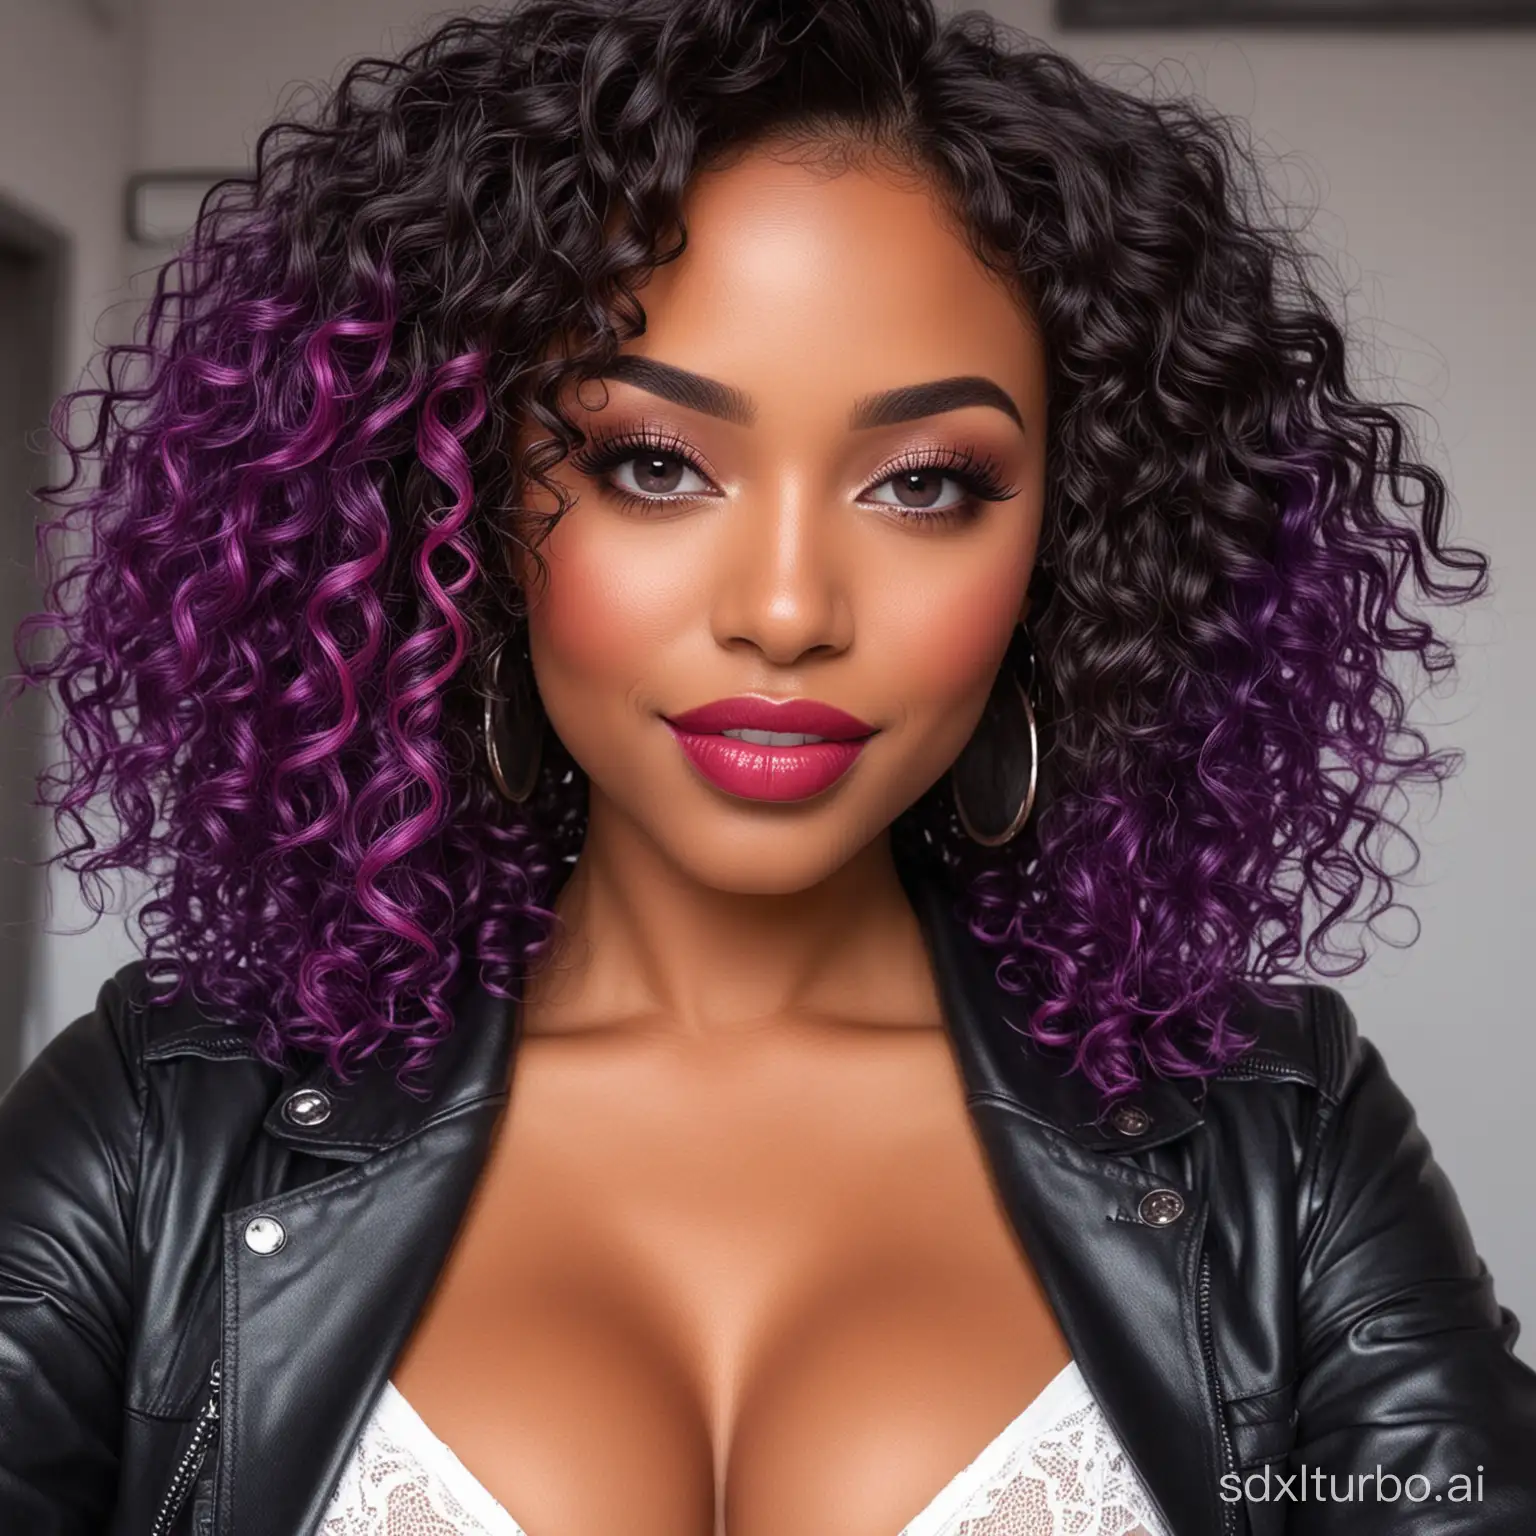 A sexy black lady from Portugal，a sexy and charming smile，oval face,purple eyes，the lips are painted with rose red lipstick，blue highlight dyed hair,Sexy and charming micro curly hairstyle，Wearing white tight underwear inside，Black leather jacket